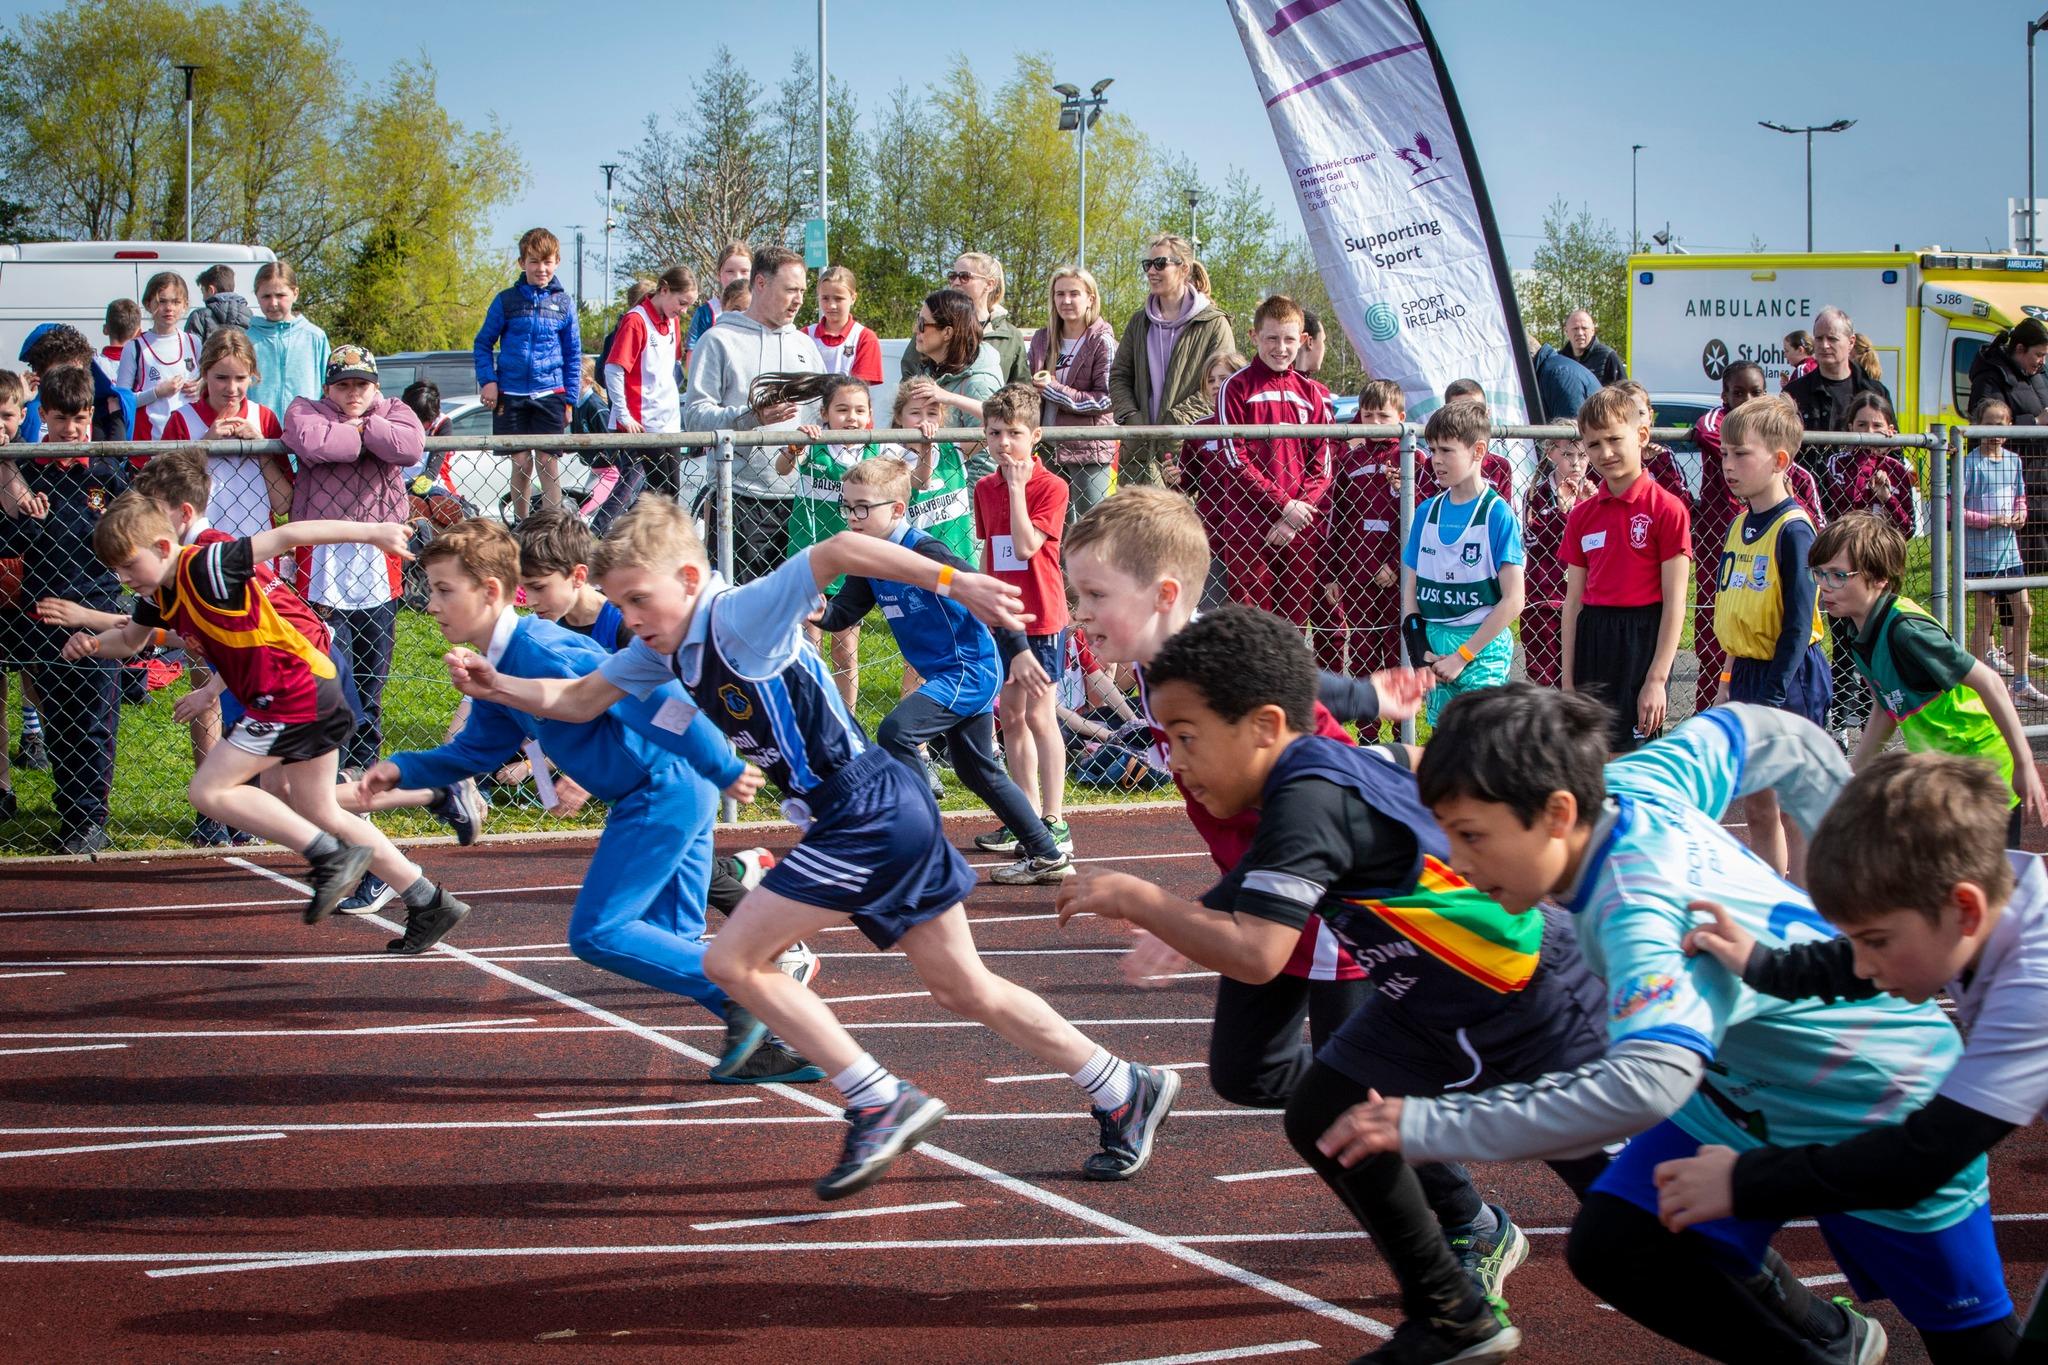 The council wants to help grow athletics in Fingal and help create unparalleled opportunities for young athletes